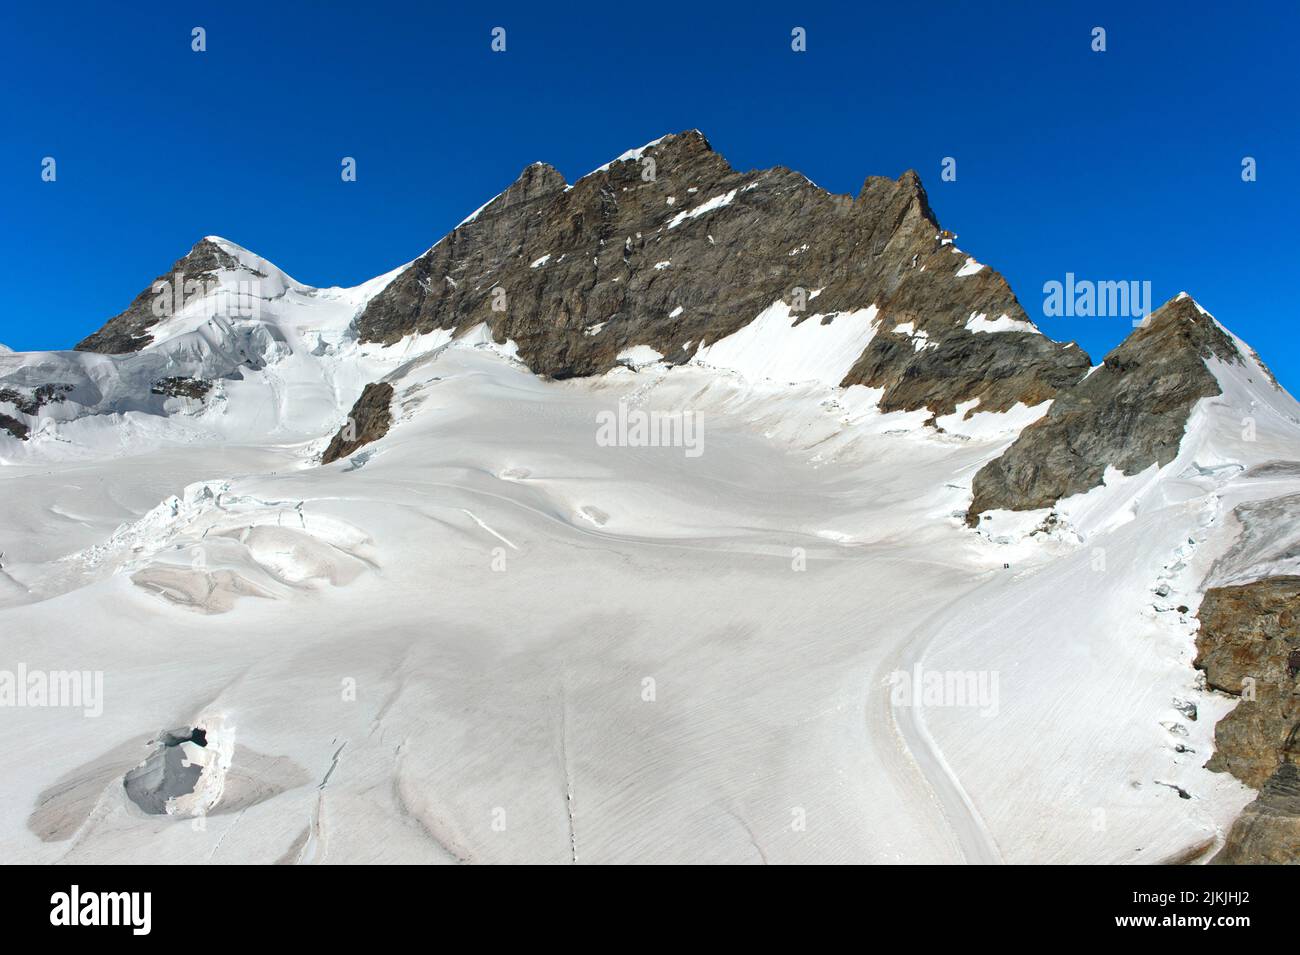 View over the Jungfraufirm to the Jungfrau summit, Grindelwald, Bernese Oberland, Switzerland Stock Photo